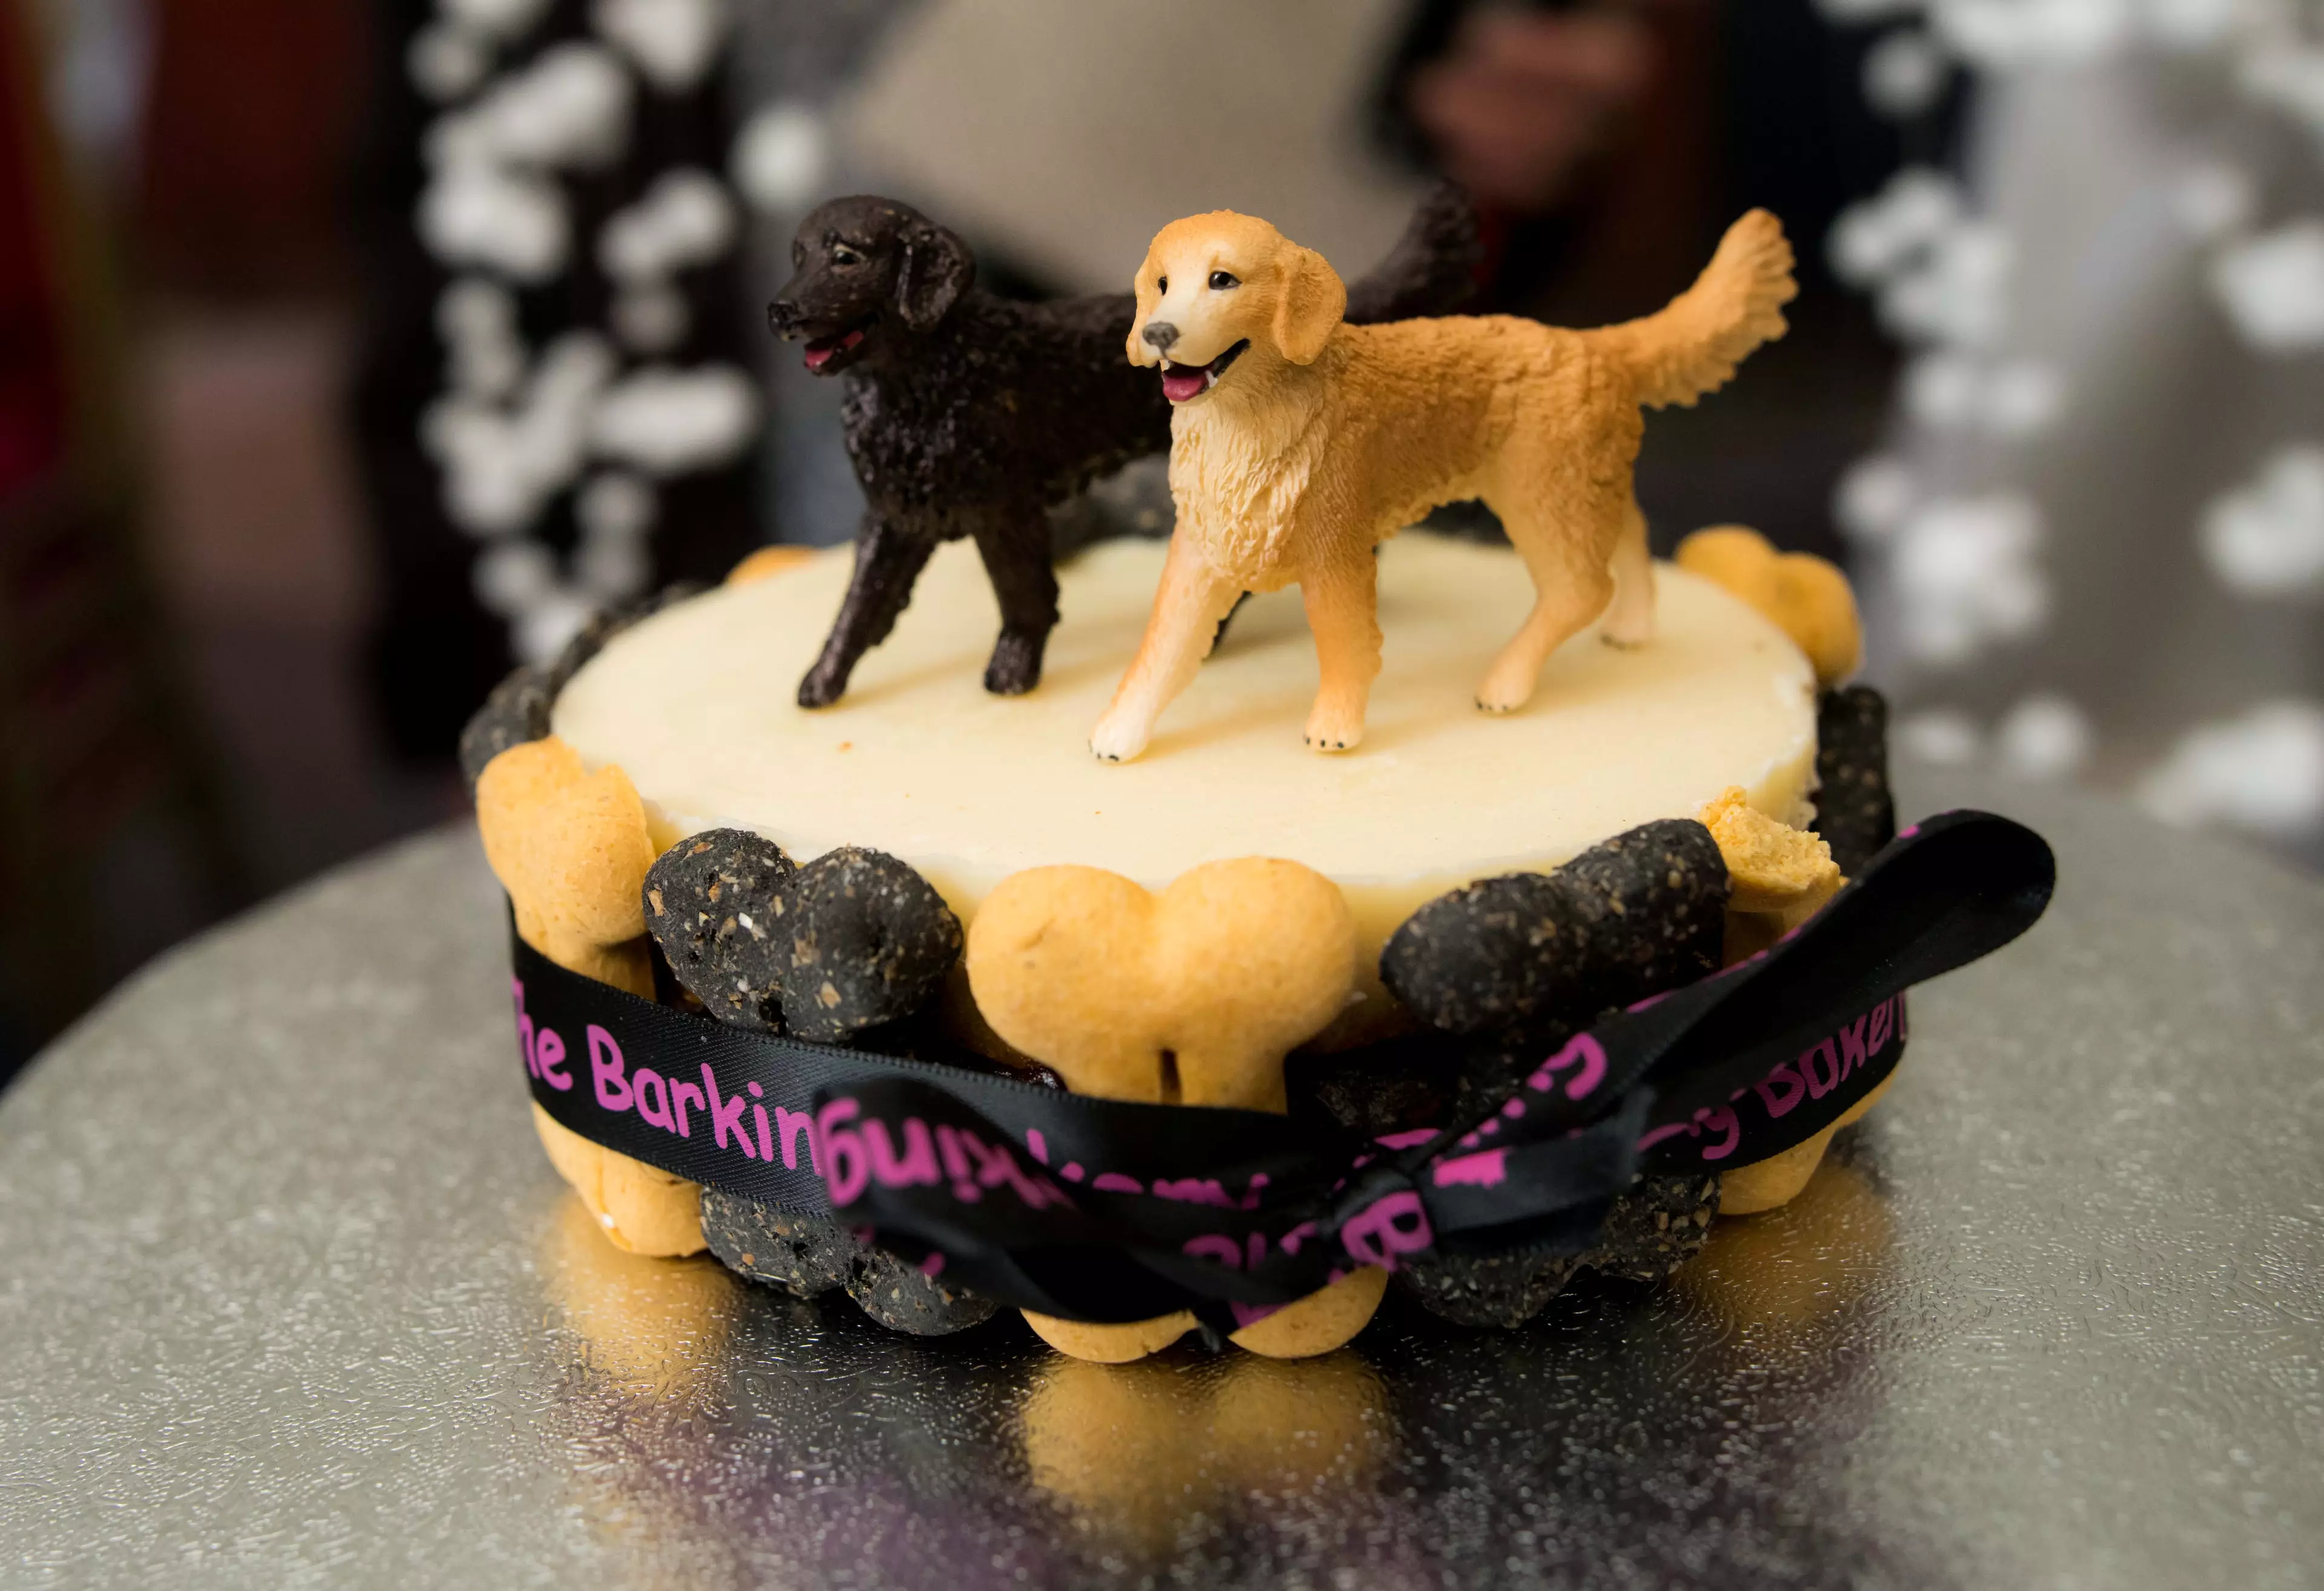 The big day for the dogs included a specially-made dog-friendly cake. (